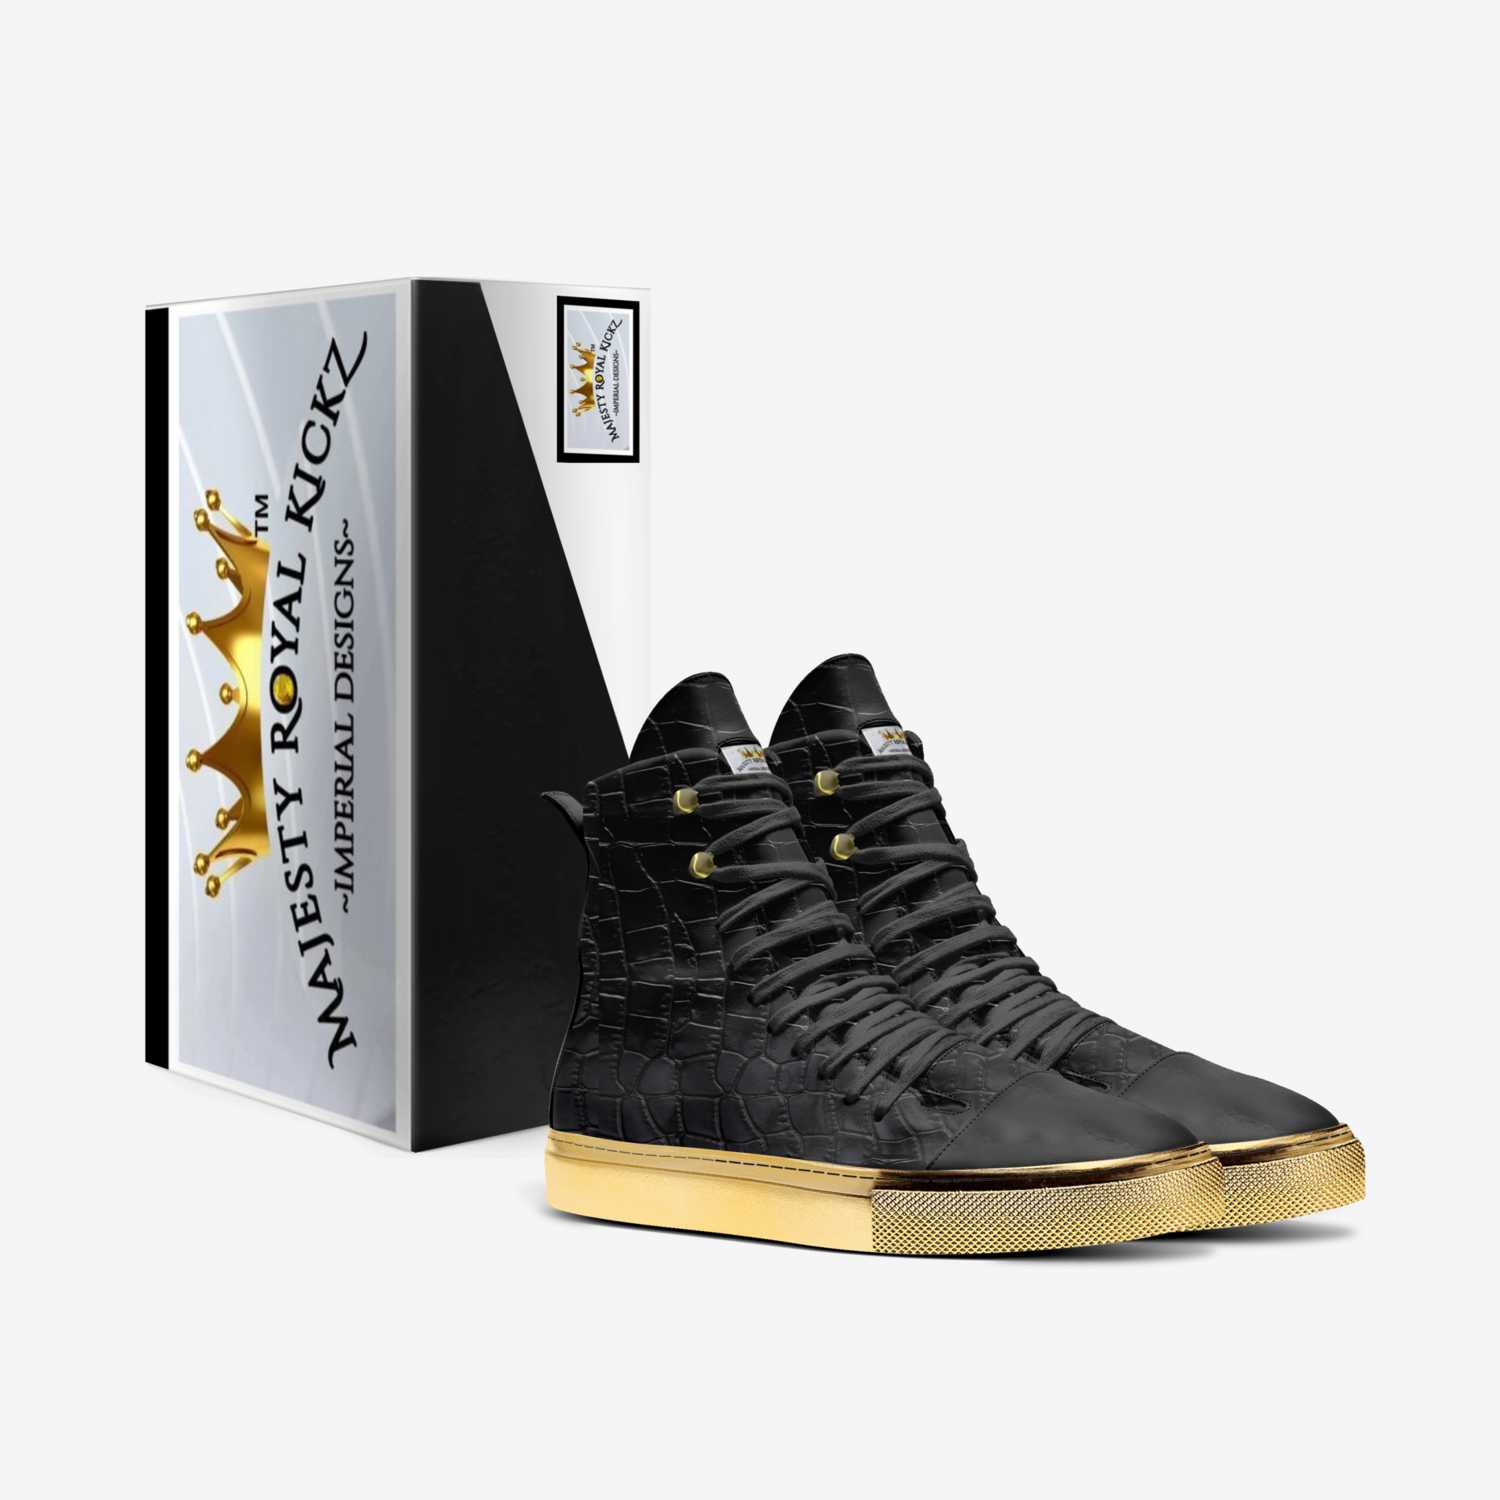 Majesty RoyalKickz custom made in Italy shoes by Mayriah Gross | Box view